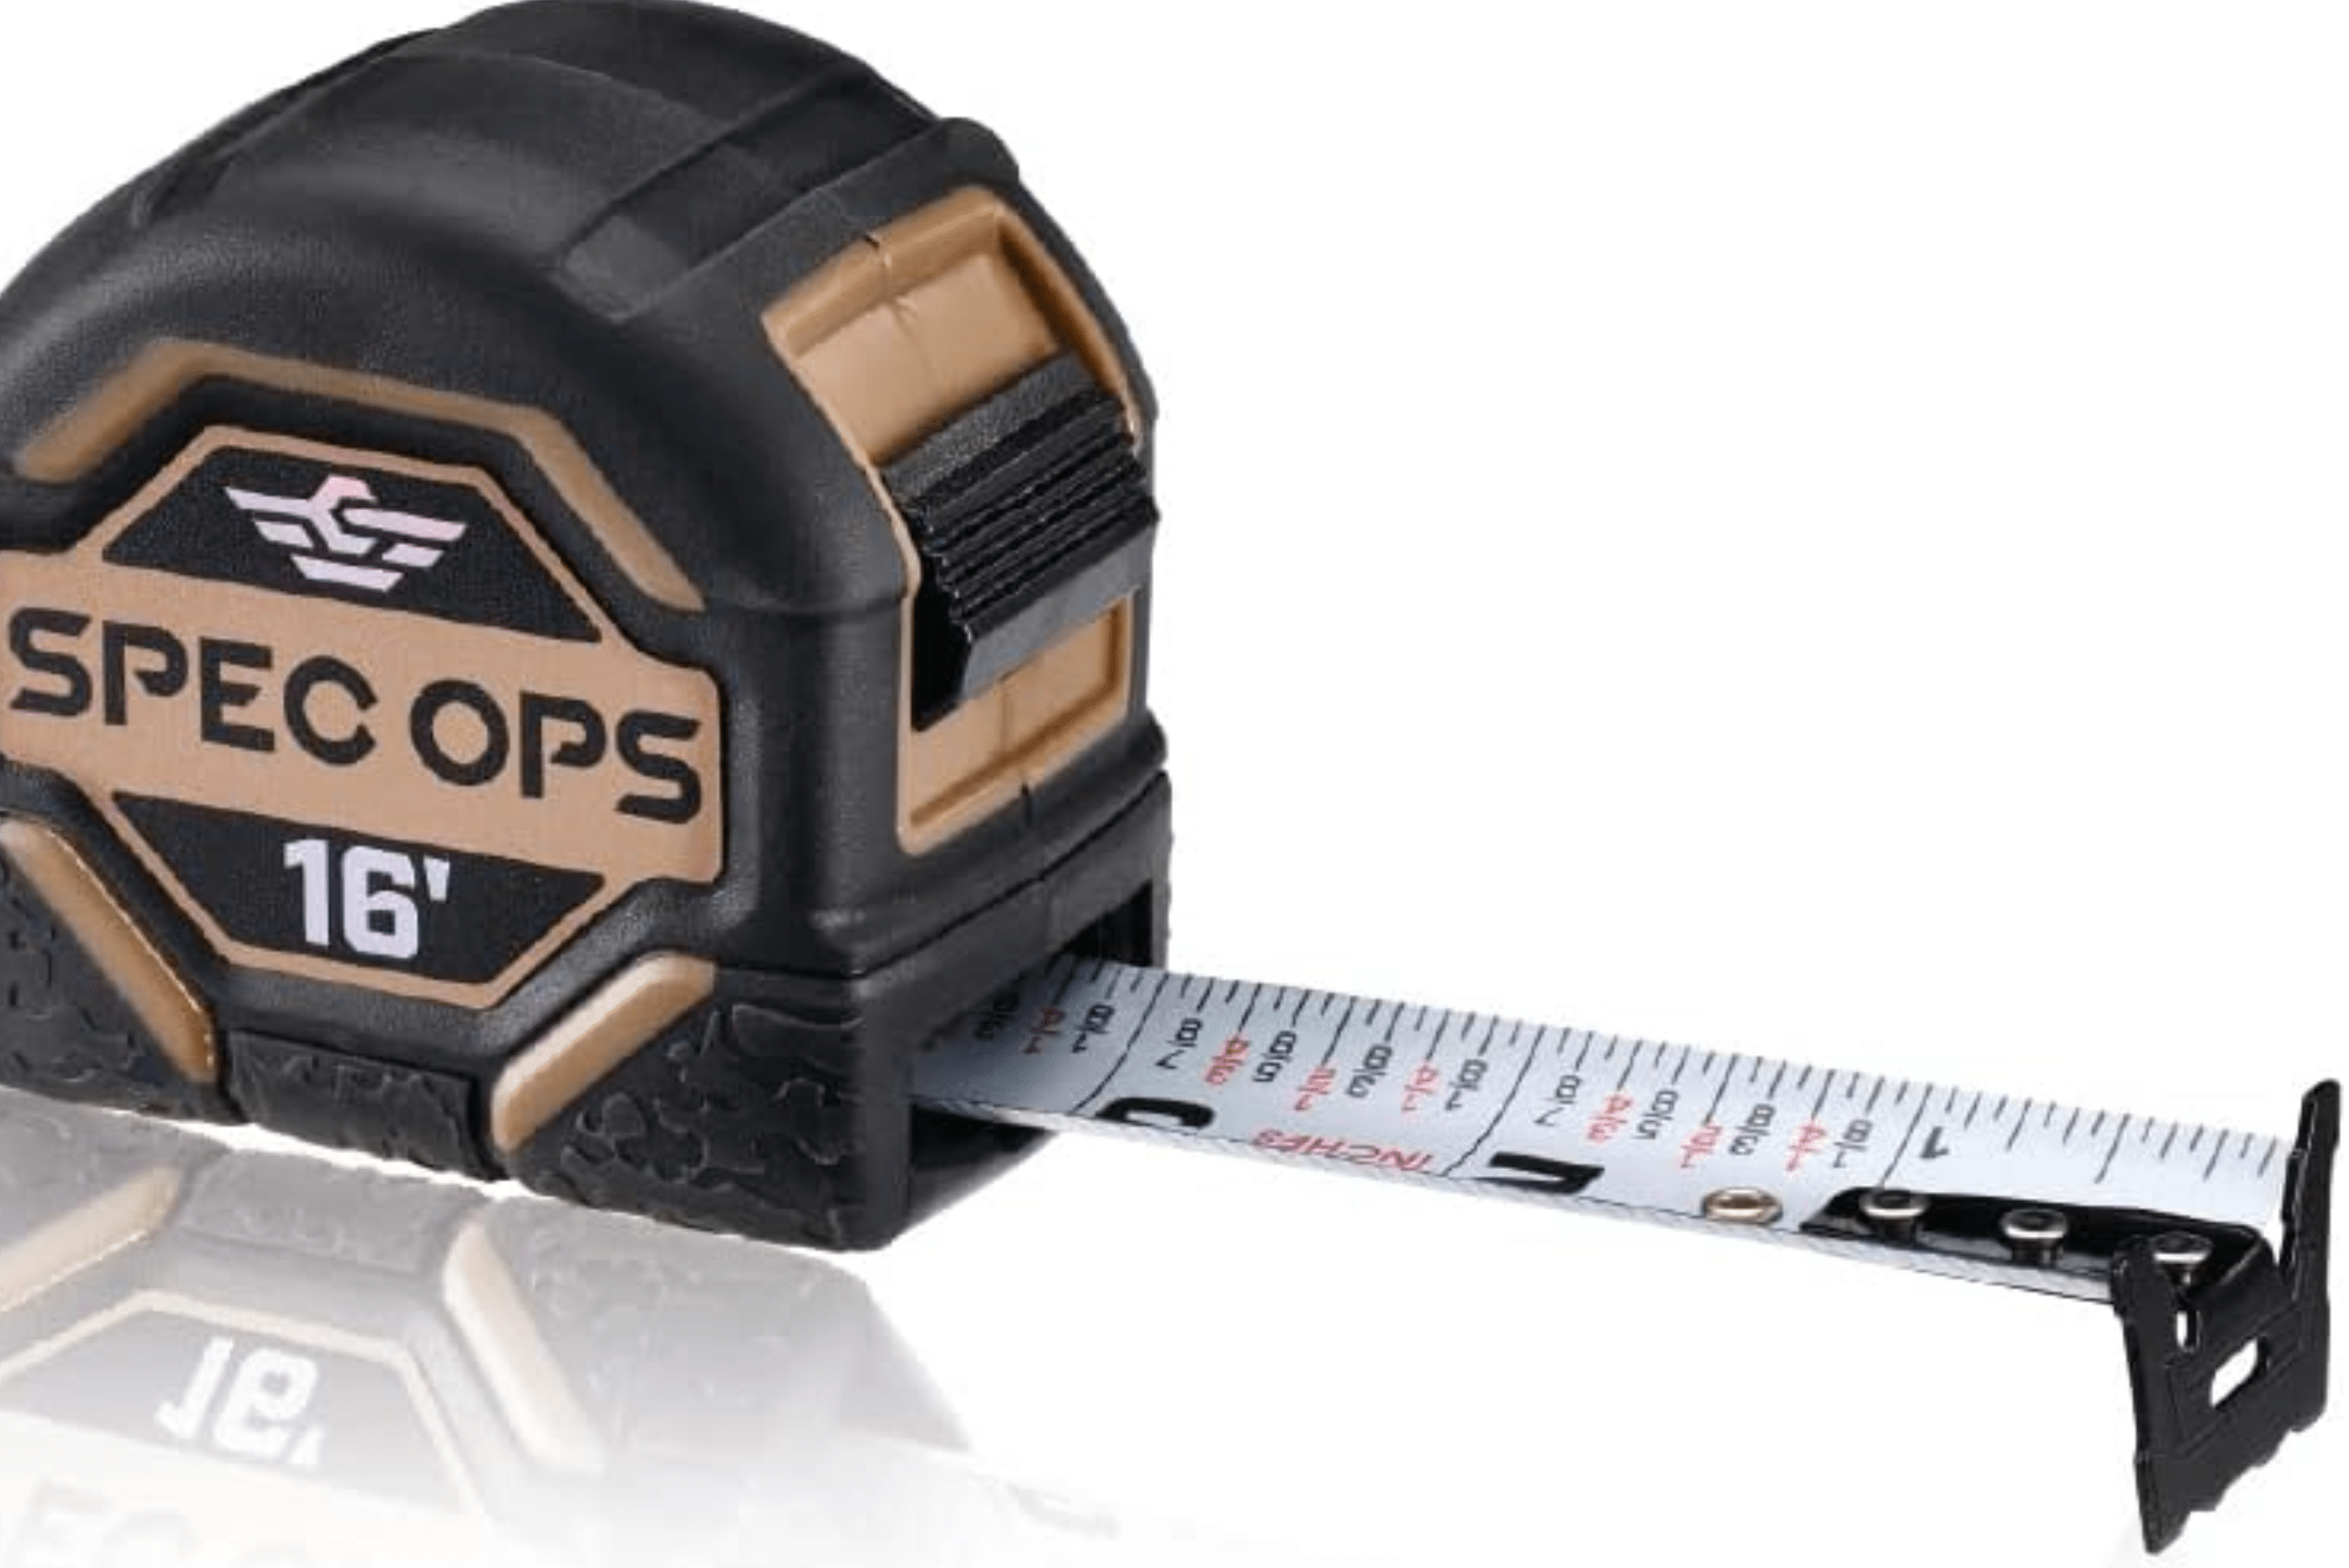 A measuring tape with serrated edge on a white background.